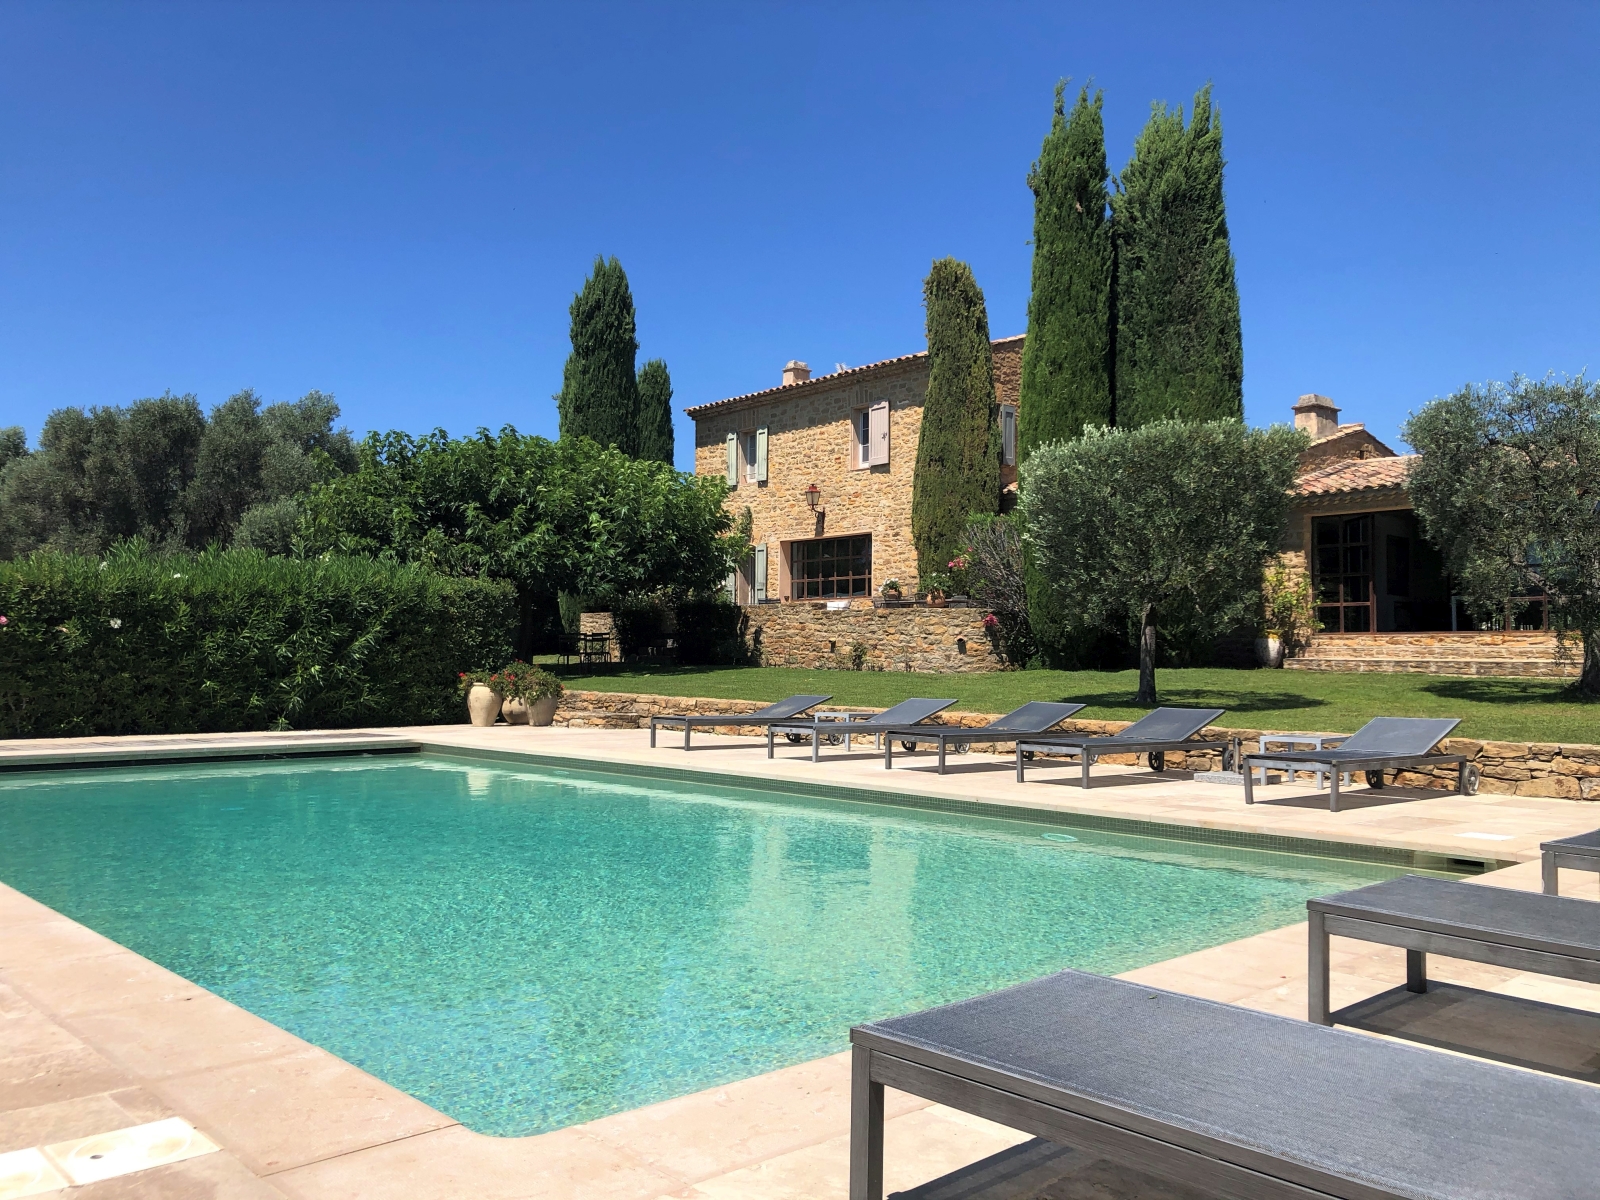 Pool and pool area with sun loungers, flowers & view of house & garden with trees at La Cadiere on the Cote d’Azur, France